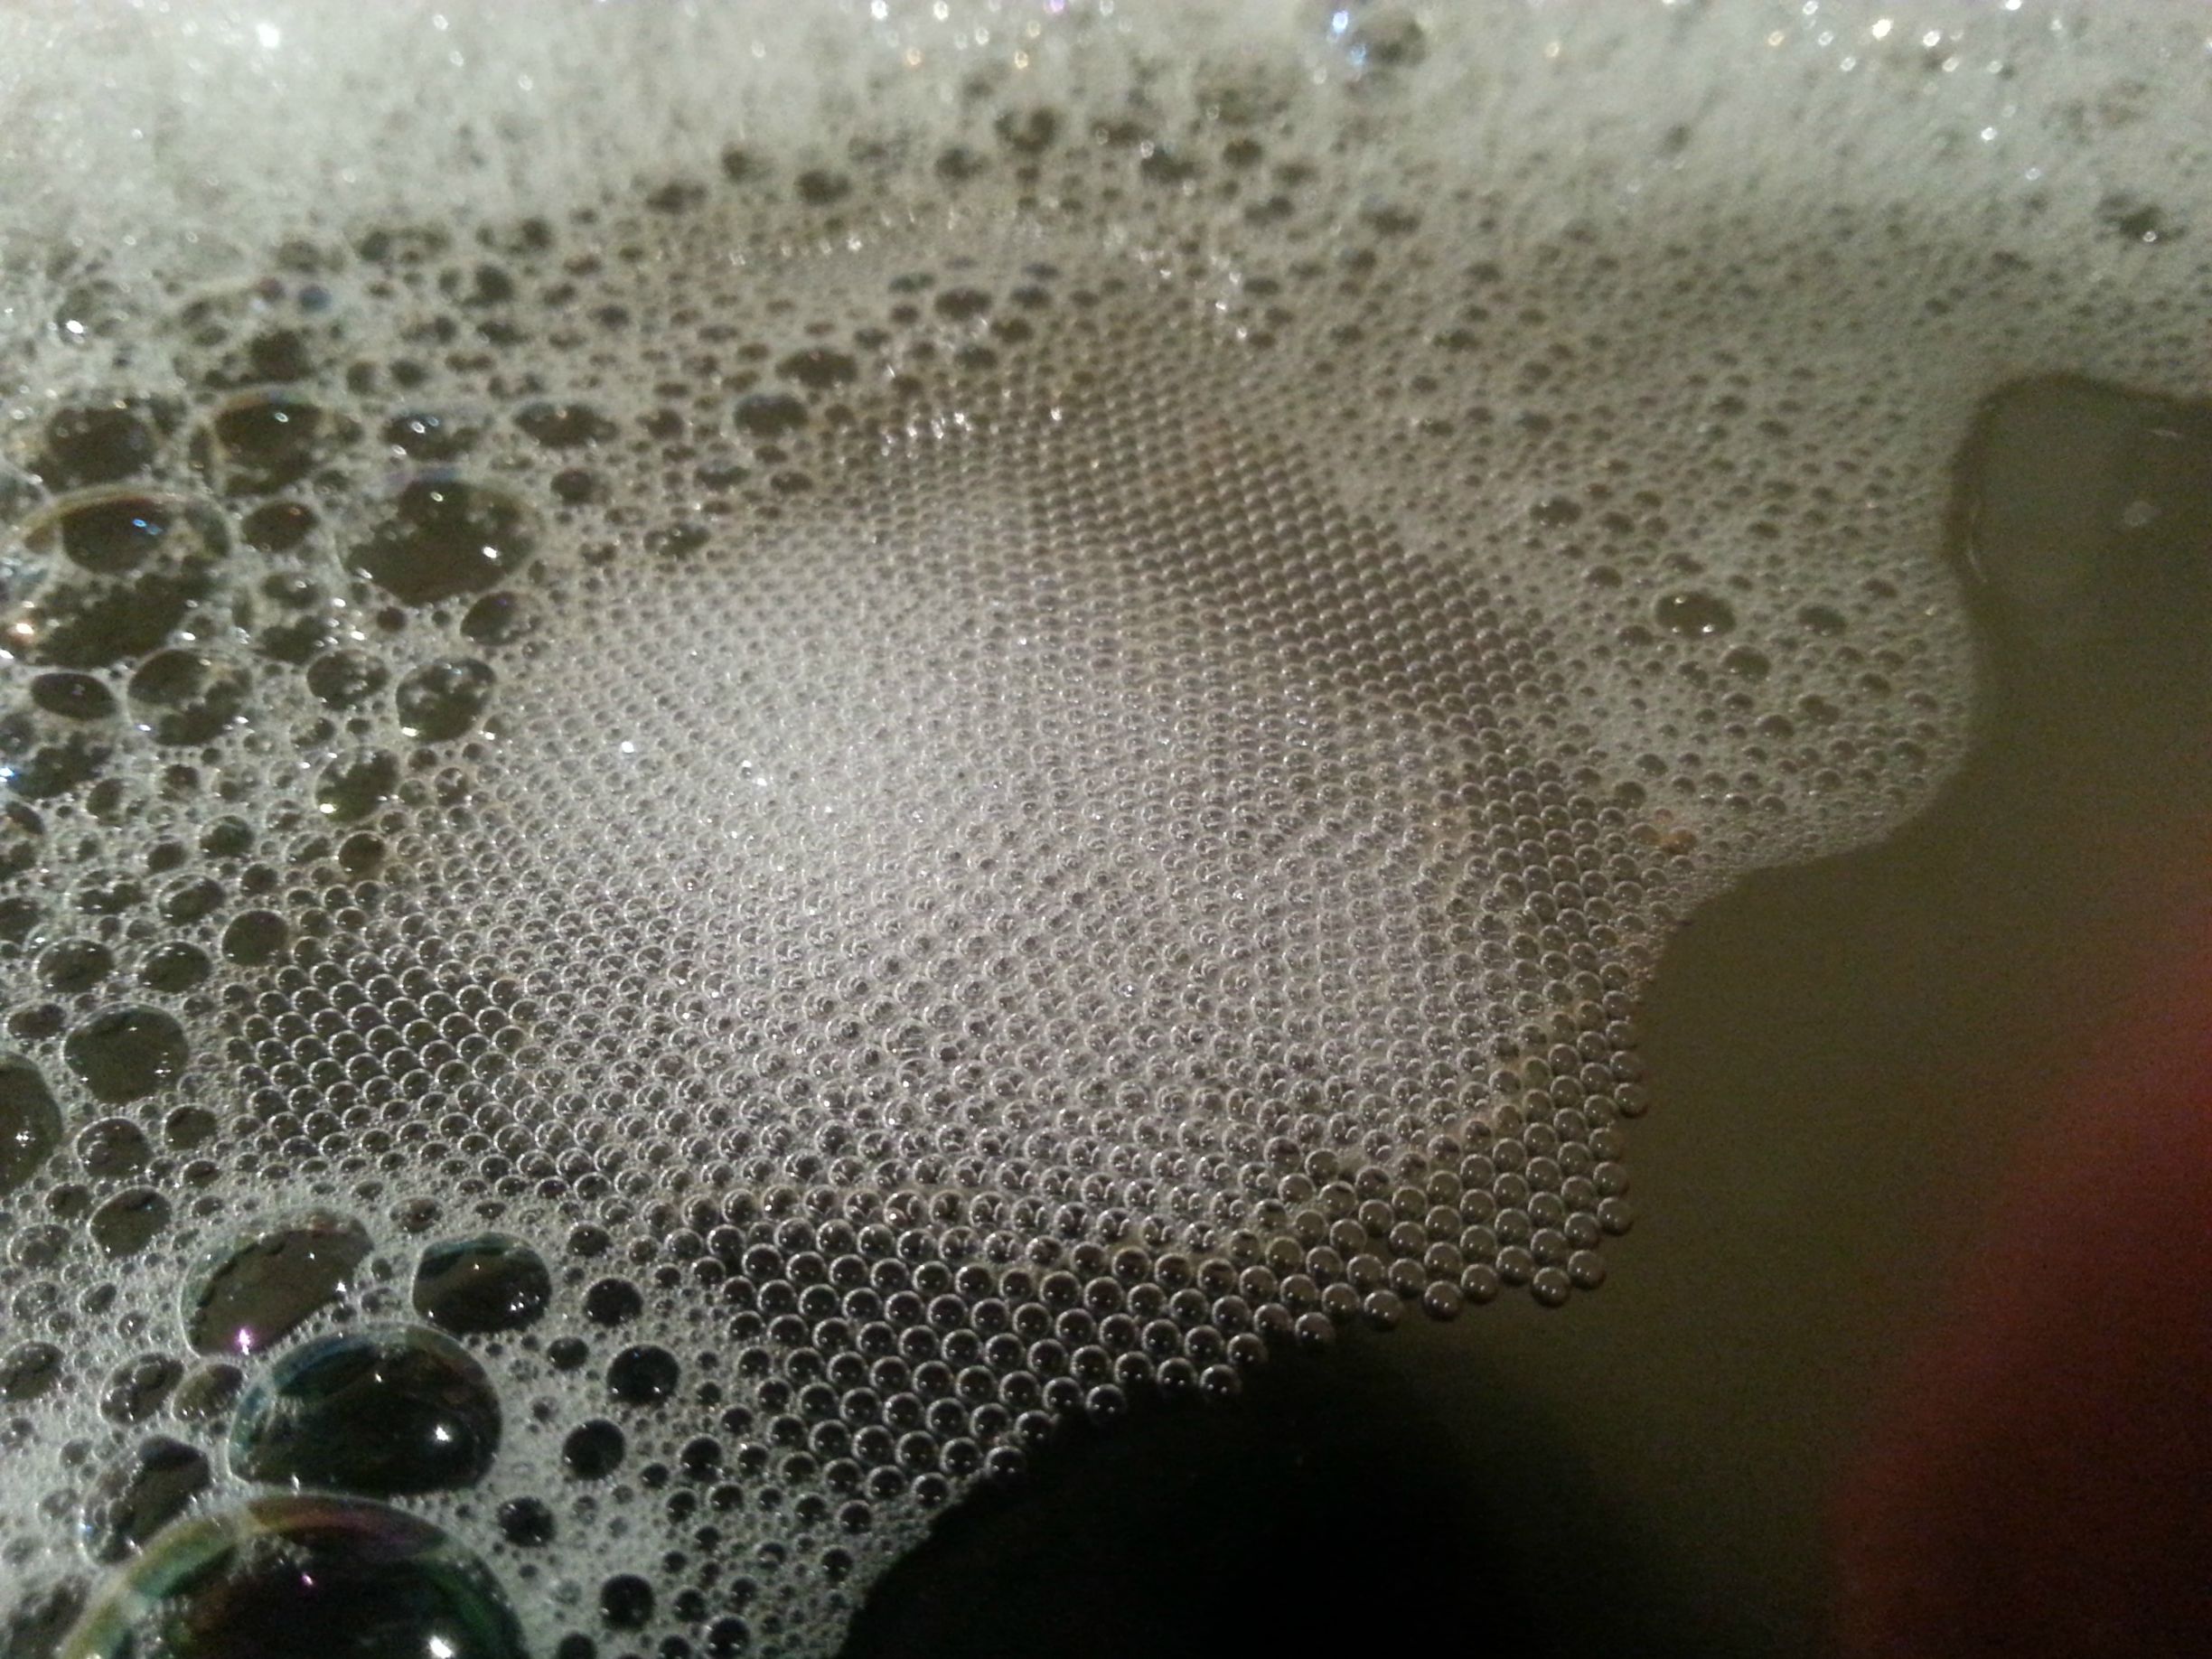 The uniformity of these bubbles